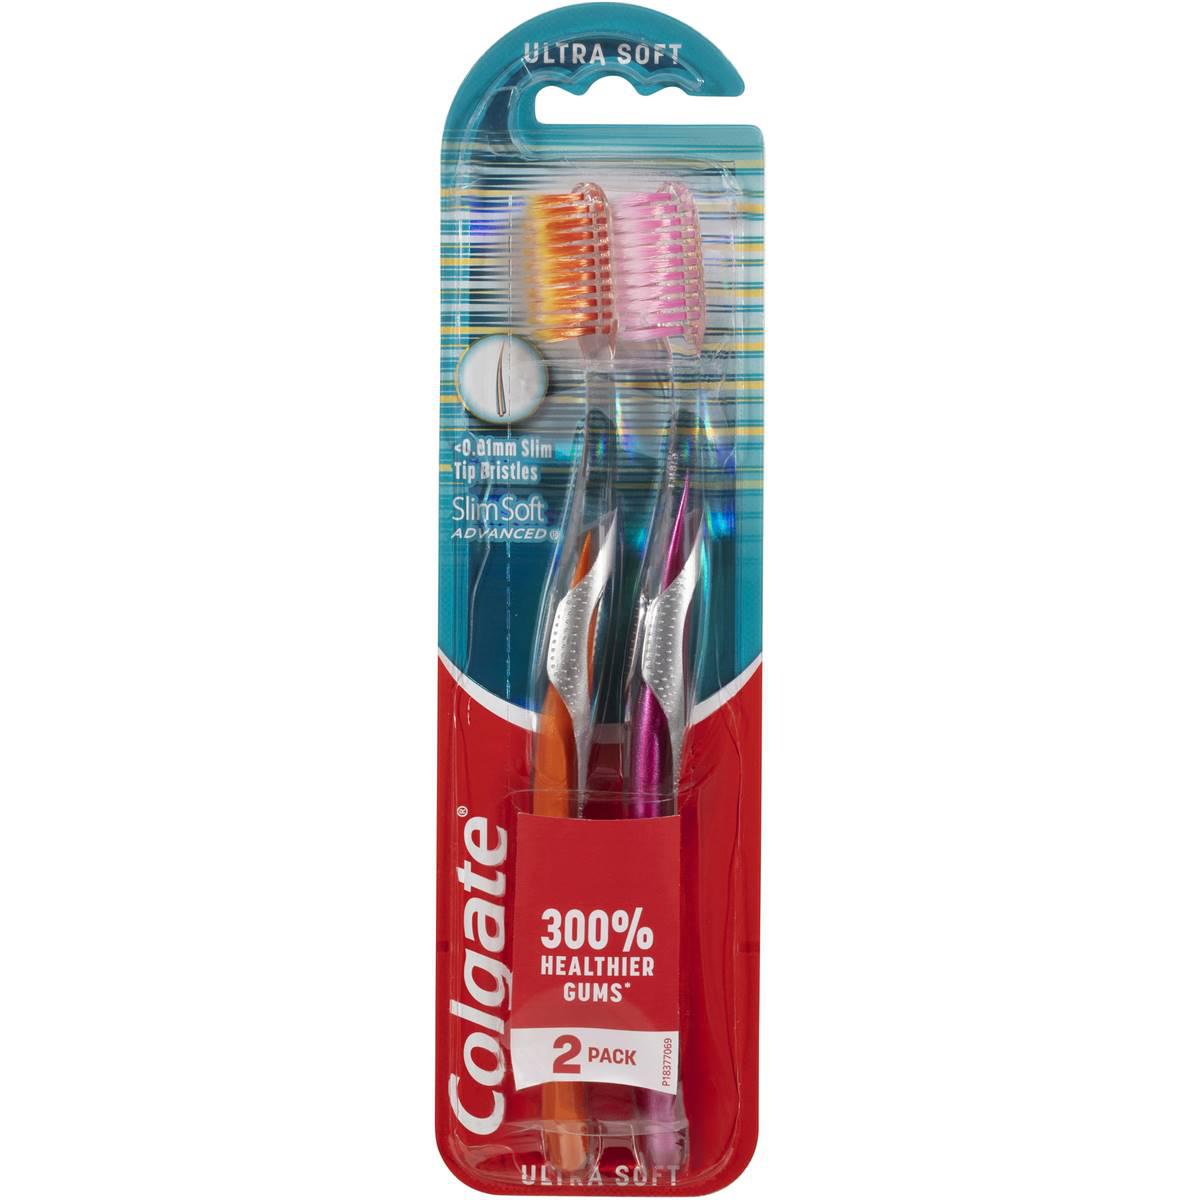 Colgate Toothbrush Advanced Ultra Soft 2 Pack